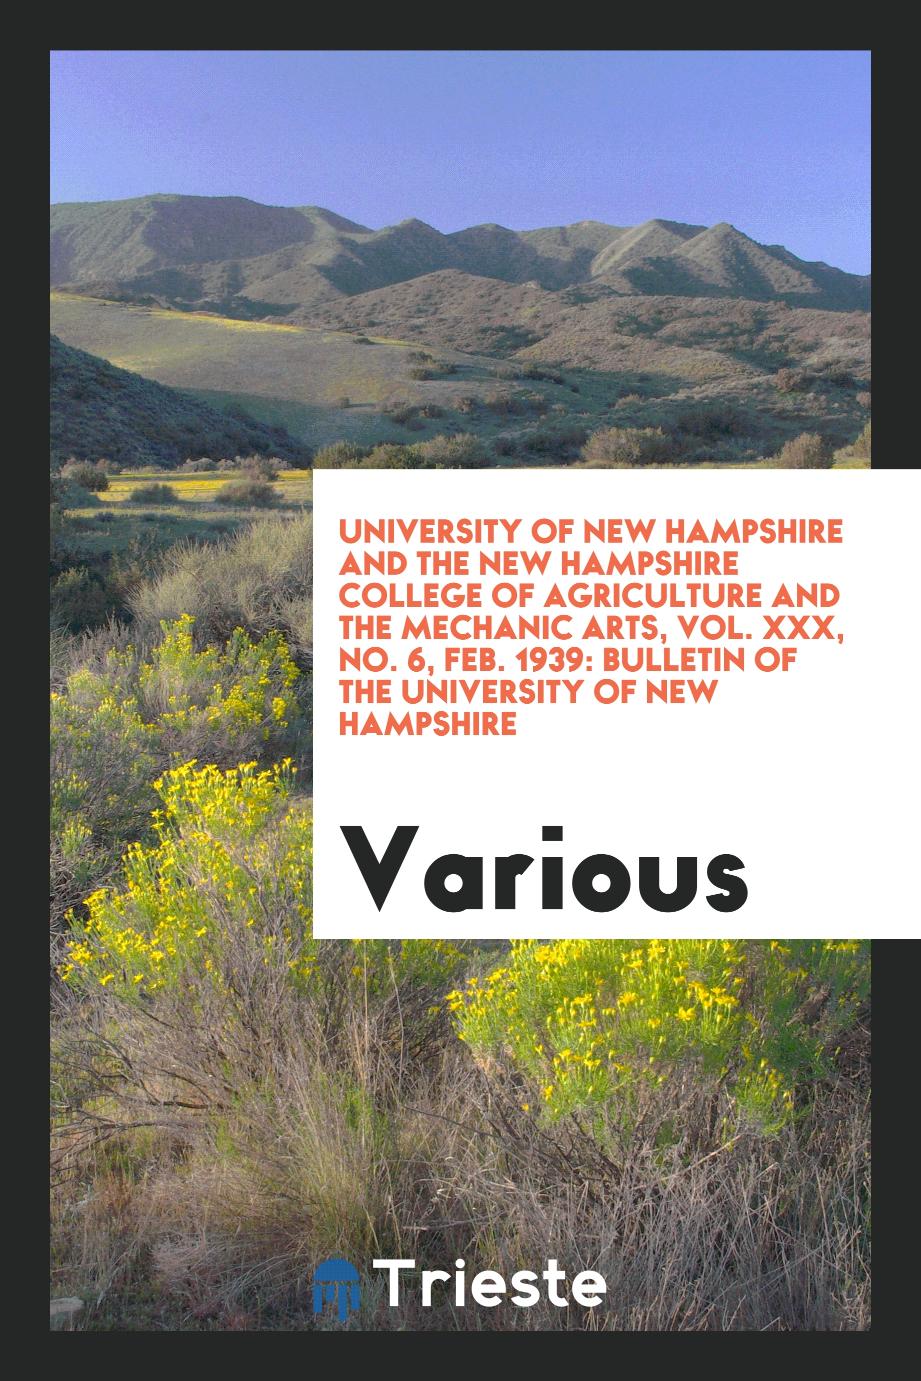 University of New Hampshire and the New Hampshire College of Agriculture and the Mechanic Arts, Vol. XXX, No. 6, Feb. 1939: Bulletin of the University of New Hampshire